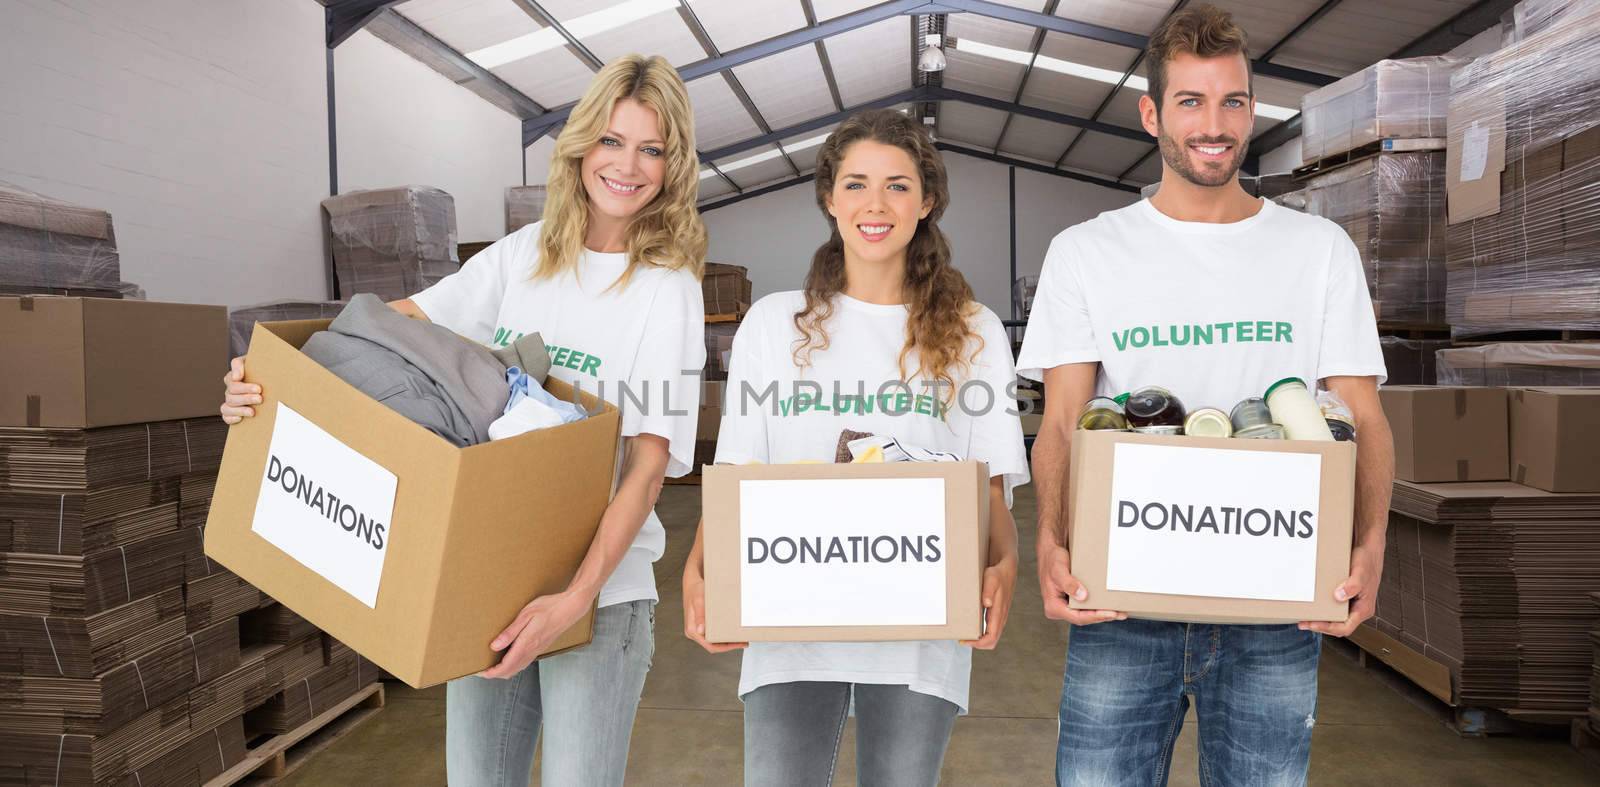 Portrait of three smiling young people with donation boxes against forklift in a large warehouse